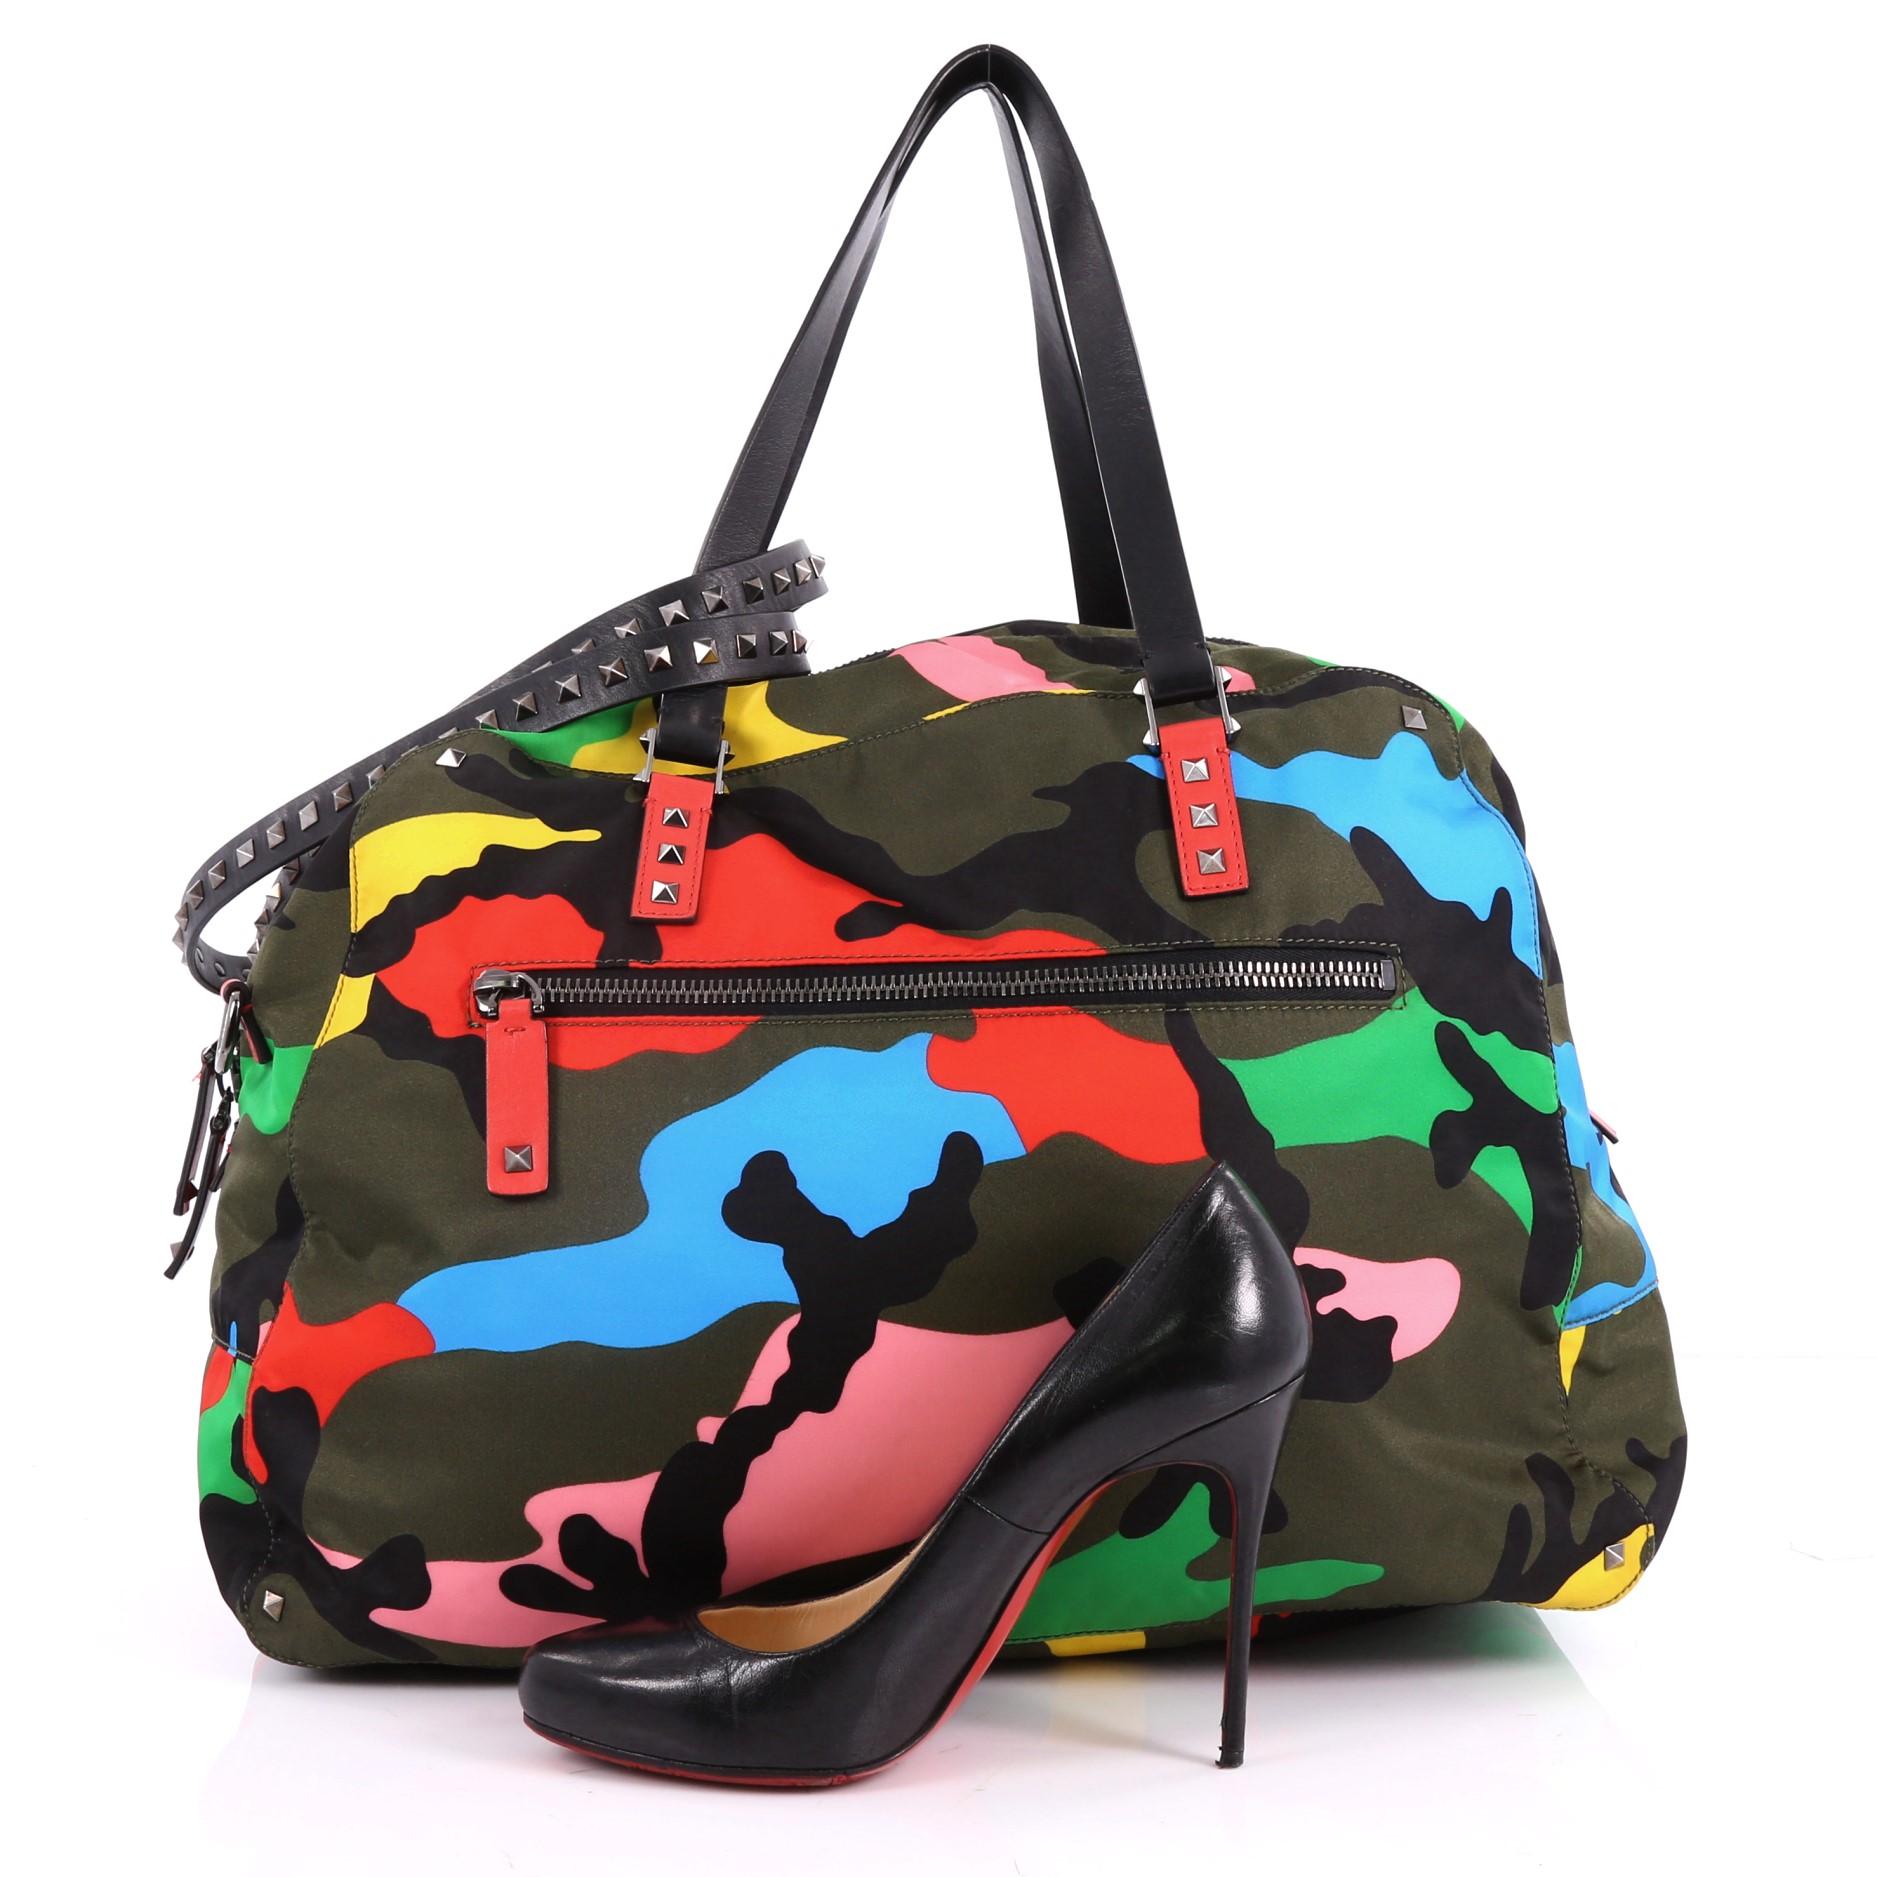 This authentic Valentino Rockstud Holdall Duffle Bag Camo Nylon Large showcases a stylishly edgy design with an easy-going silhouette. Crafted from multicolor-camo nylon, this stylish duffle bag features dual flat leather handles with rock stud